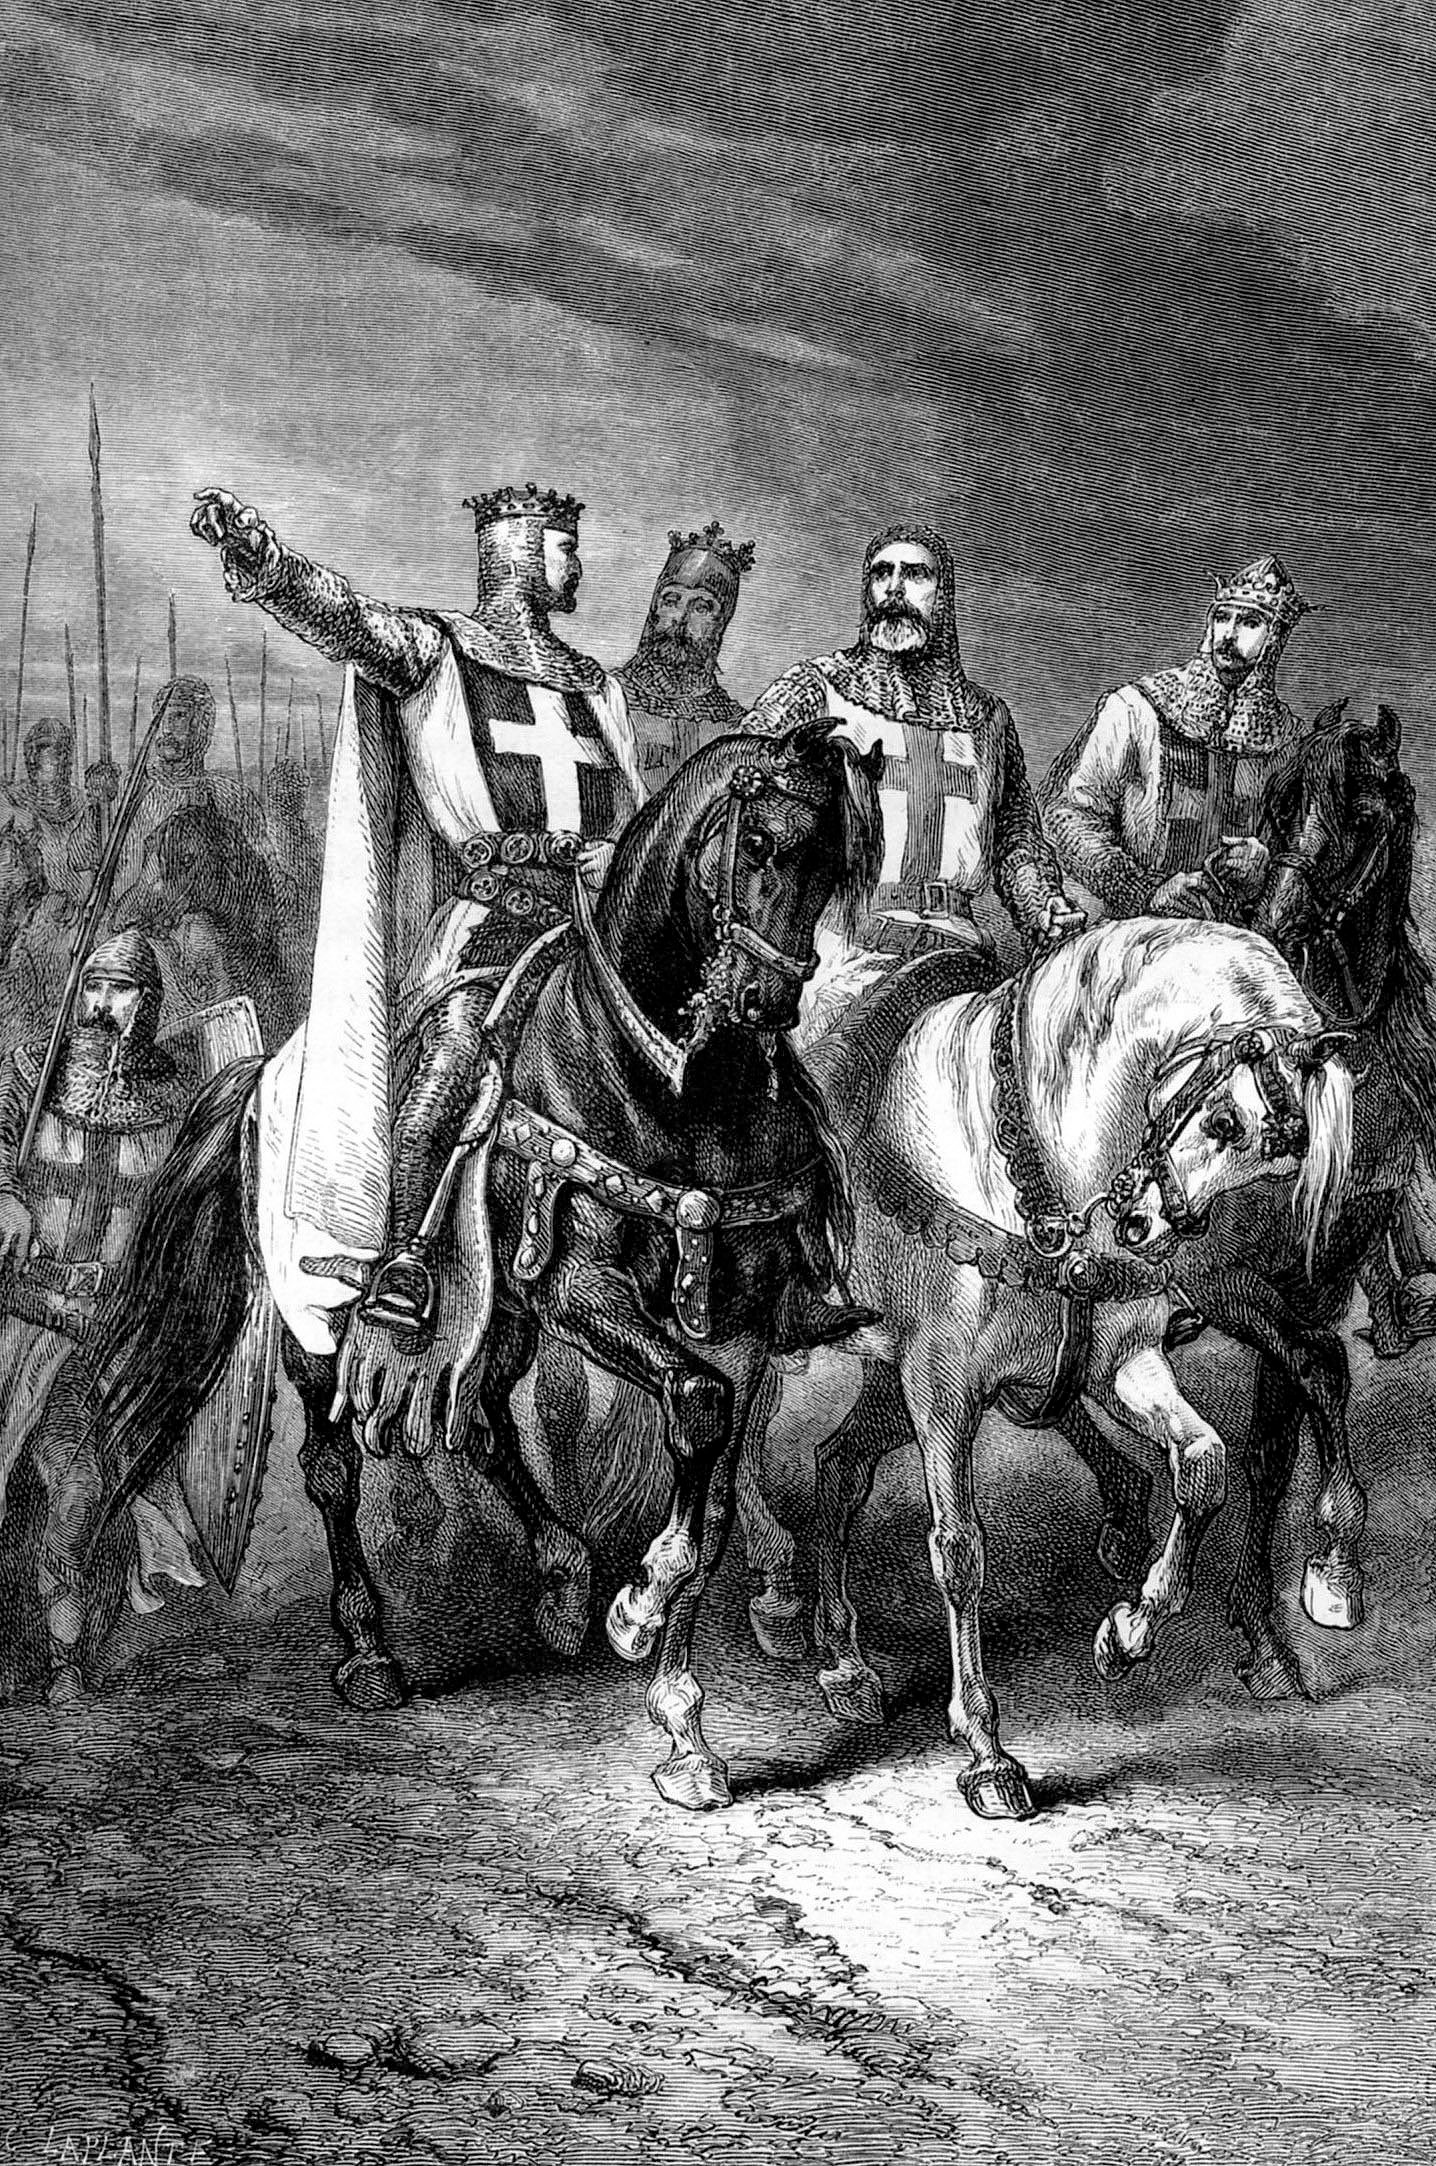 The most aggressive commanders of the First Crusade were (l to r) Duke Godfrey of Boulogne, Count Raymond of Saint-Gilles, Duke Bohemond of Taranto, and Tancred of Hauteville. 